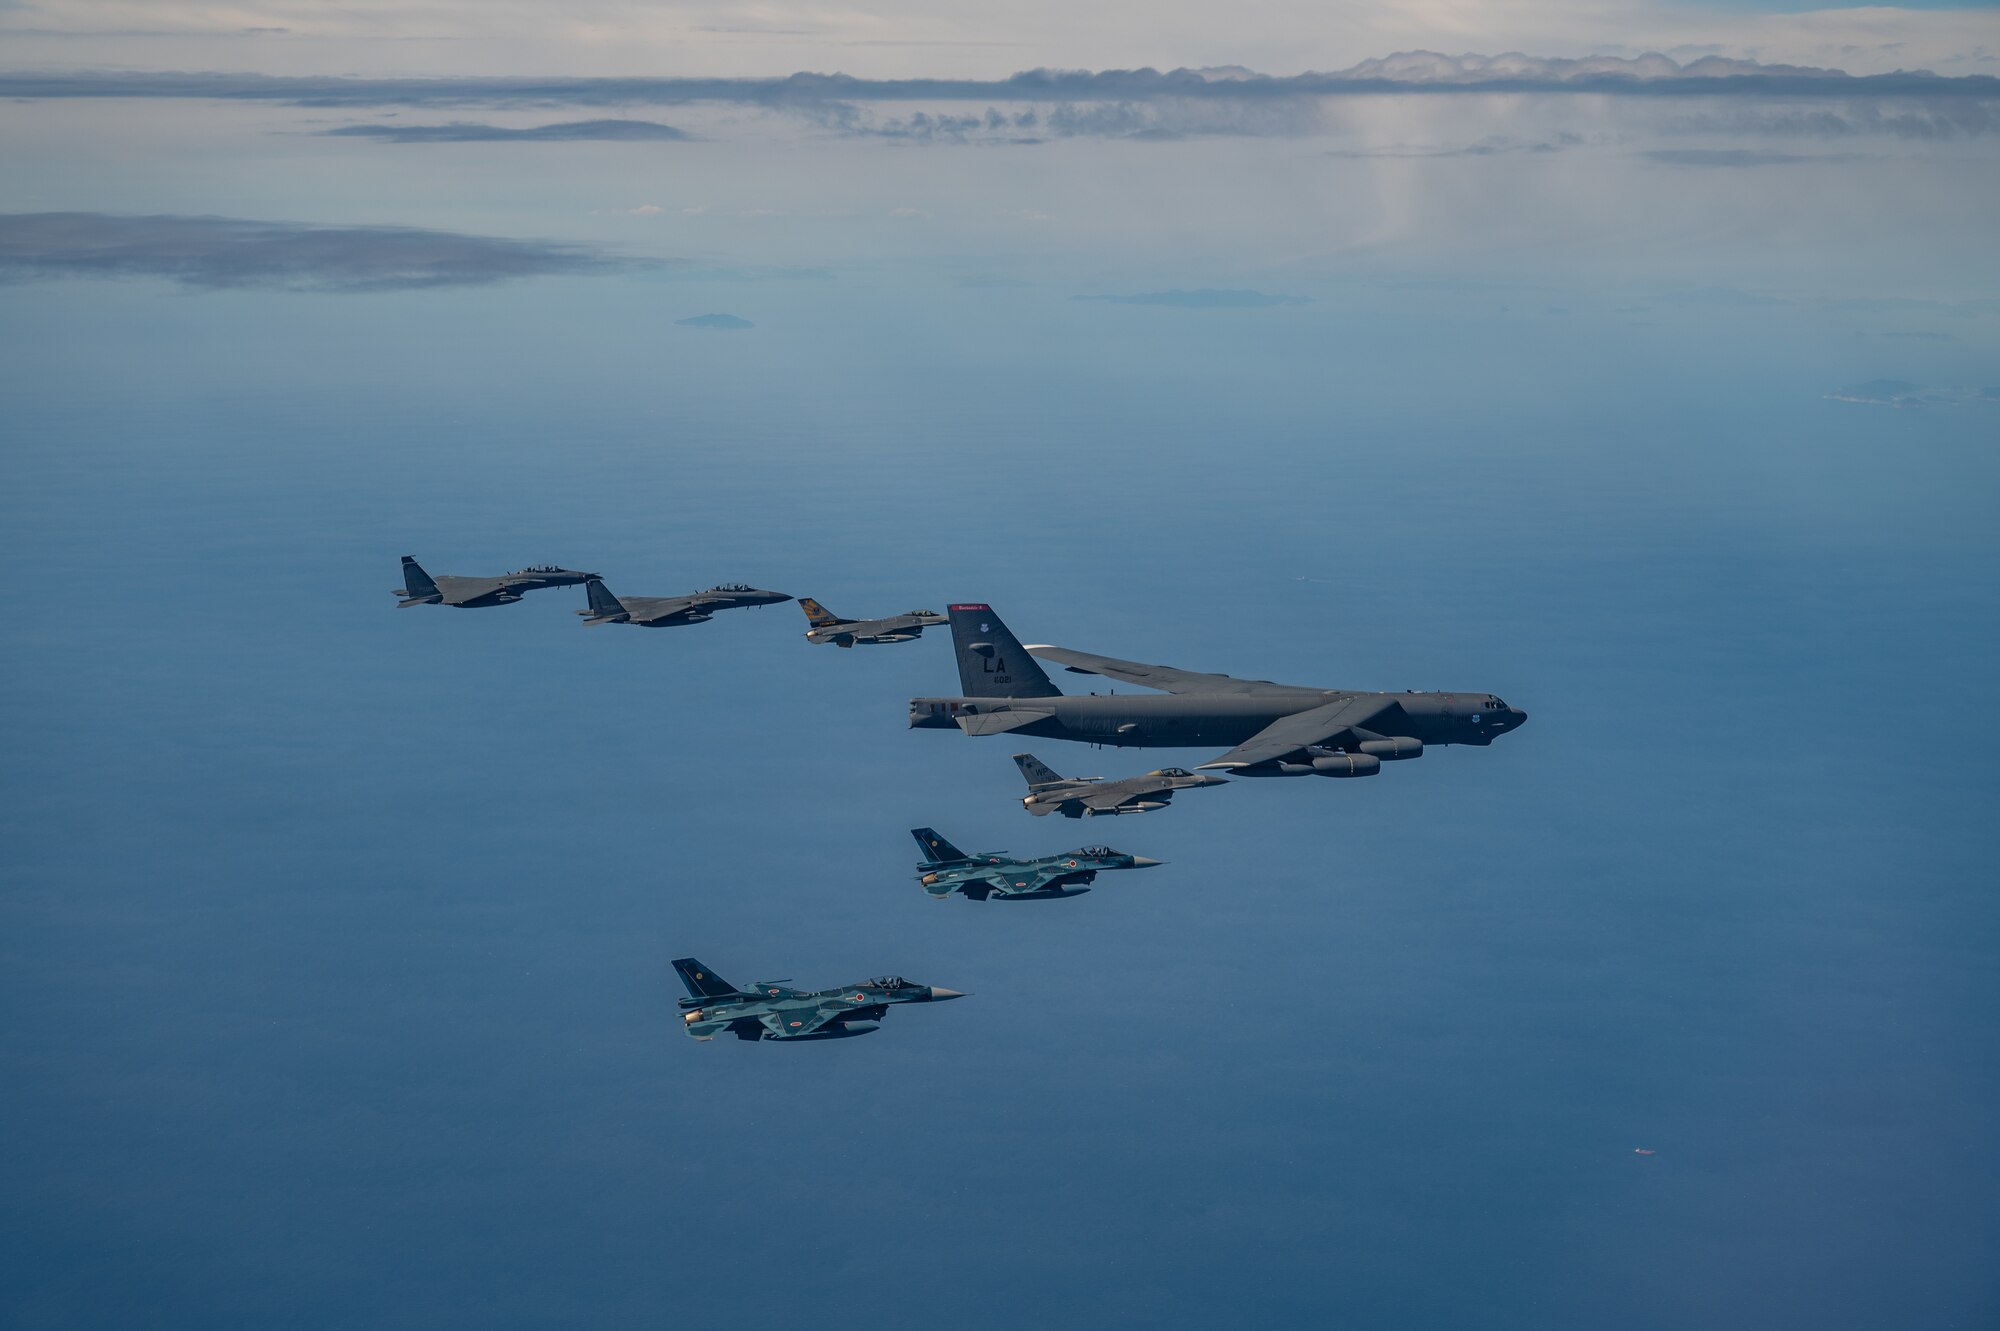 Fighter aircraft from the U.S., Japan, and the Republic of Korea conducted a trilateral escort flight of a U.S. B-52H Stratofortress Bomber operating in the Indo-Pacific, 22 Oct, 2023. U.S. F-16s from the 80th Fighter Squadron, 8th Fighter Wing flew alongside Japan Air Self-Defense Force (JASDF) F-2s from the 8th Air Wing, and Republic of Korea Air Force (ROKAF) F-15Ks from the 11th Wing. (U.S. Air Force photo by Senior Airman Karla Parra)